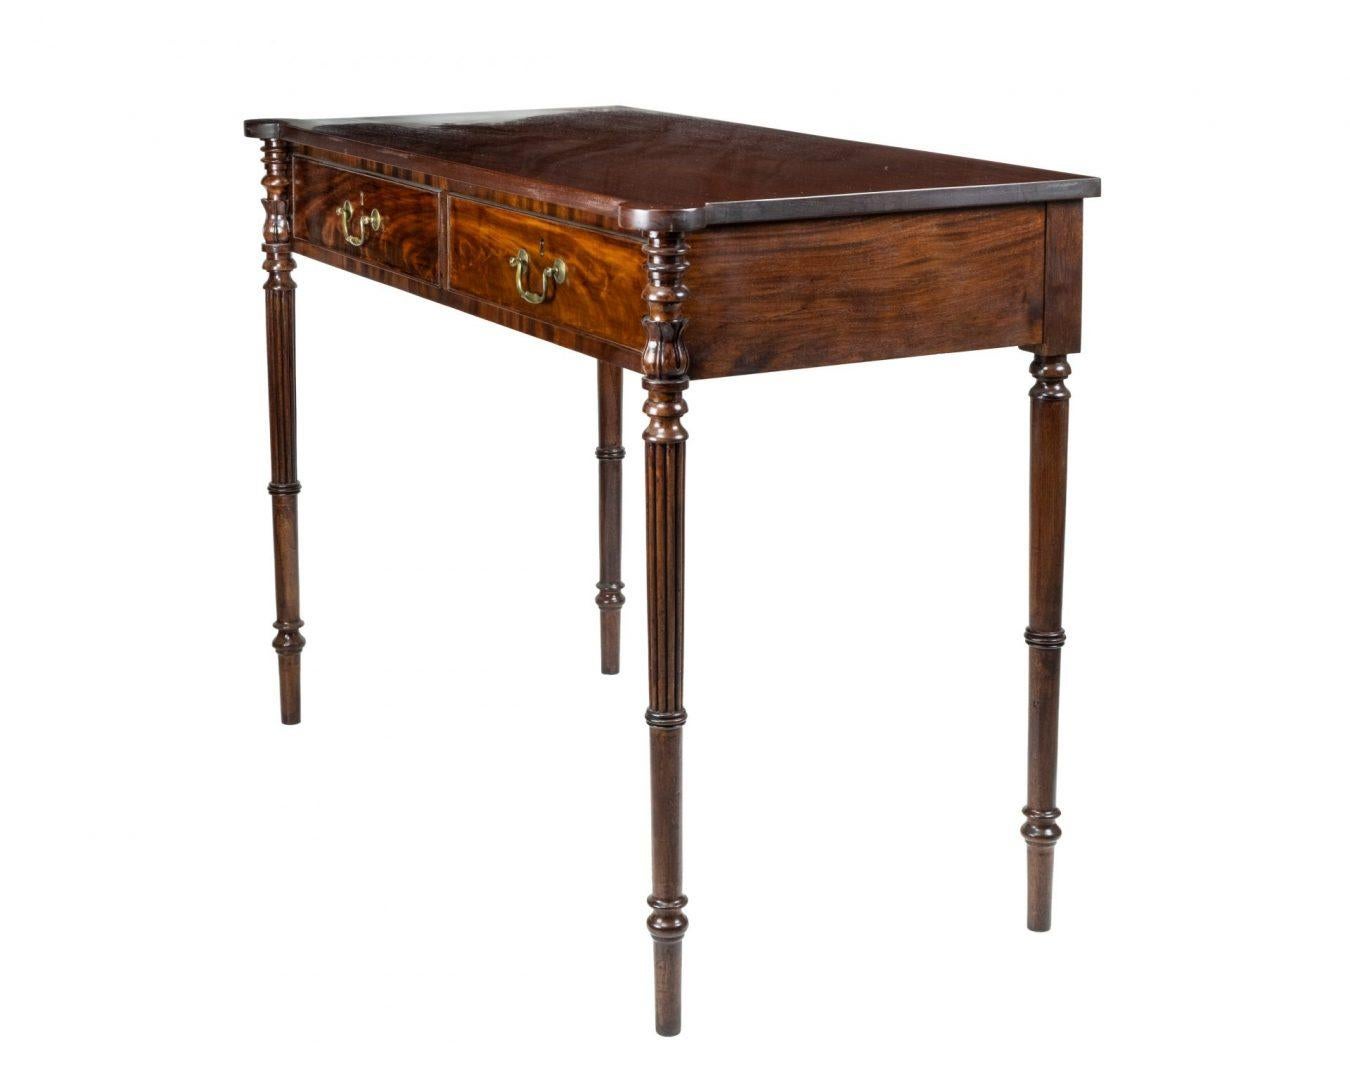 A late 19th century mahogany rectangular side table with two drawers, signed Gillows, on turned and reeded corner font legs
Gillows of Lancaster and London, also known as Gillow & Co., was an English furniture making firm based in Lancaster,